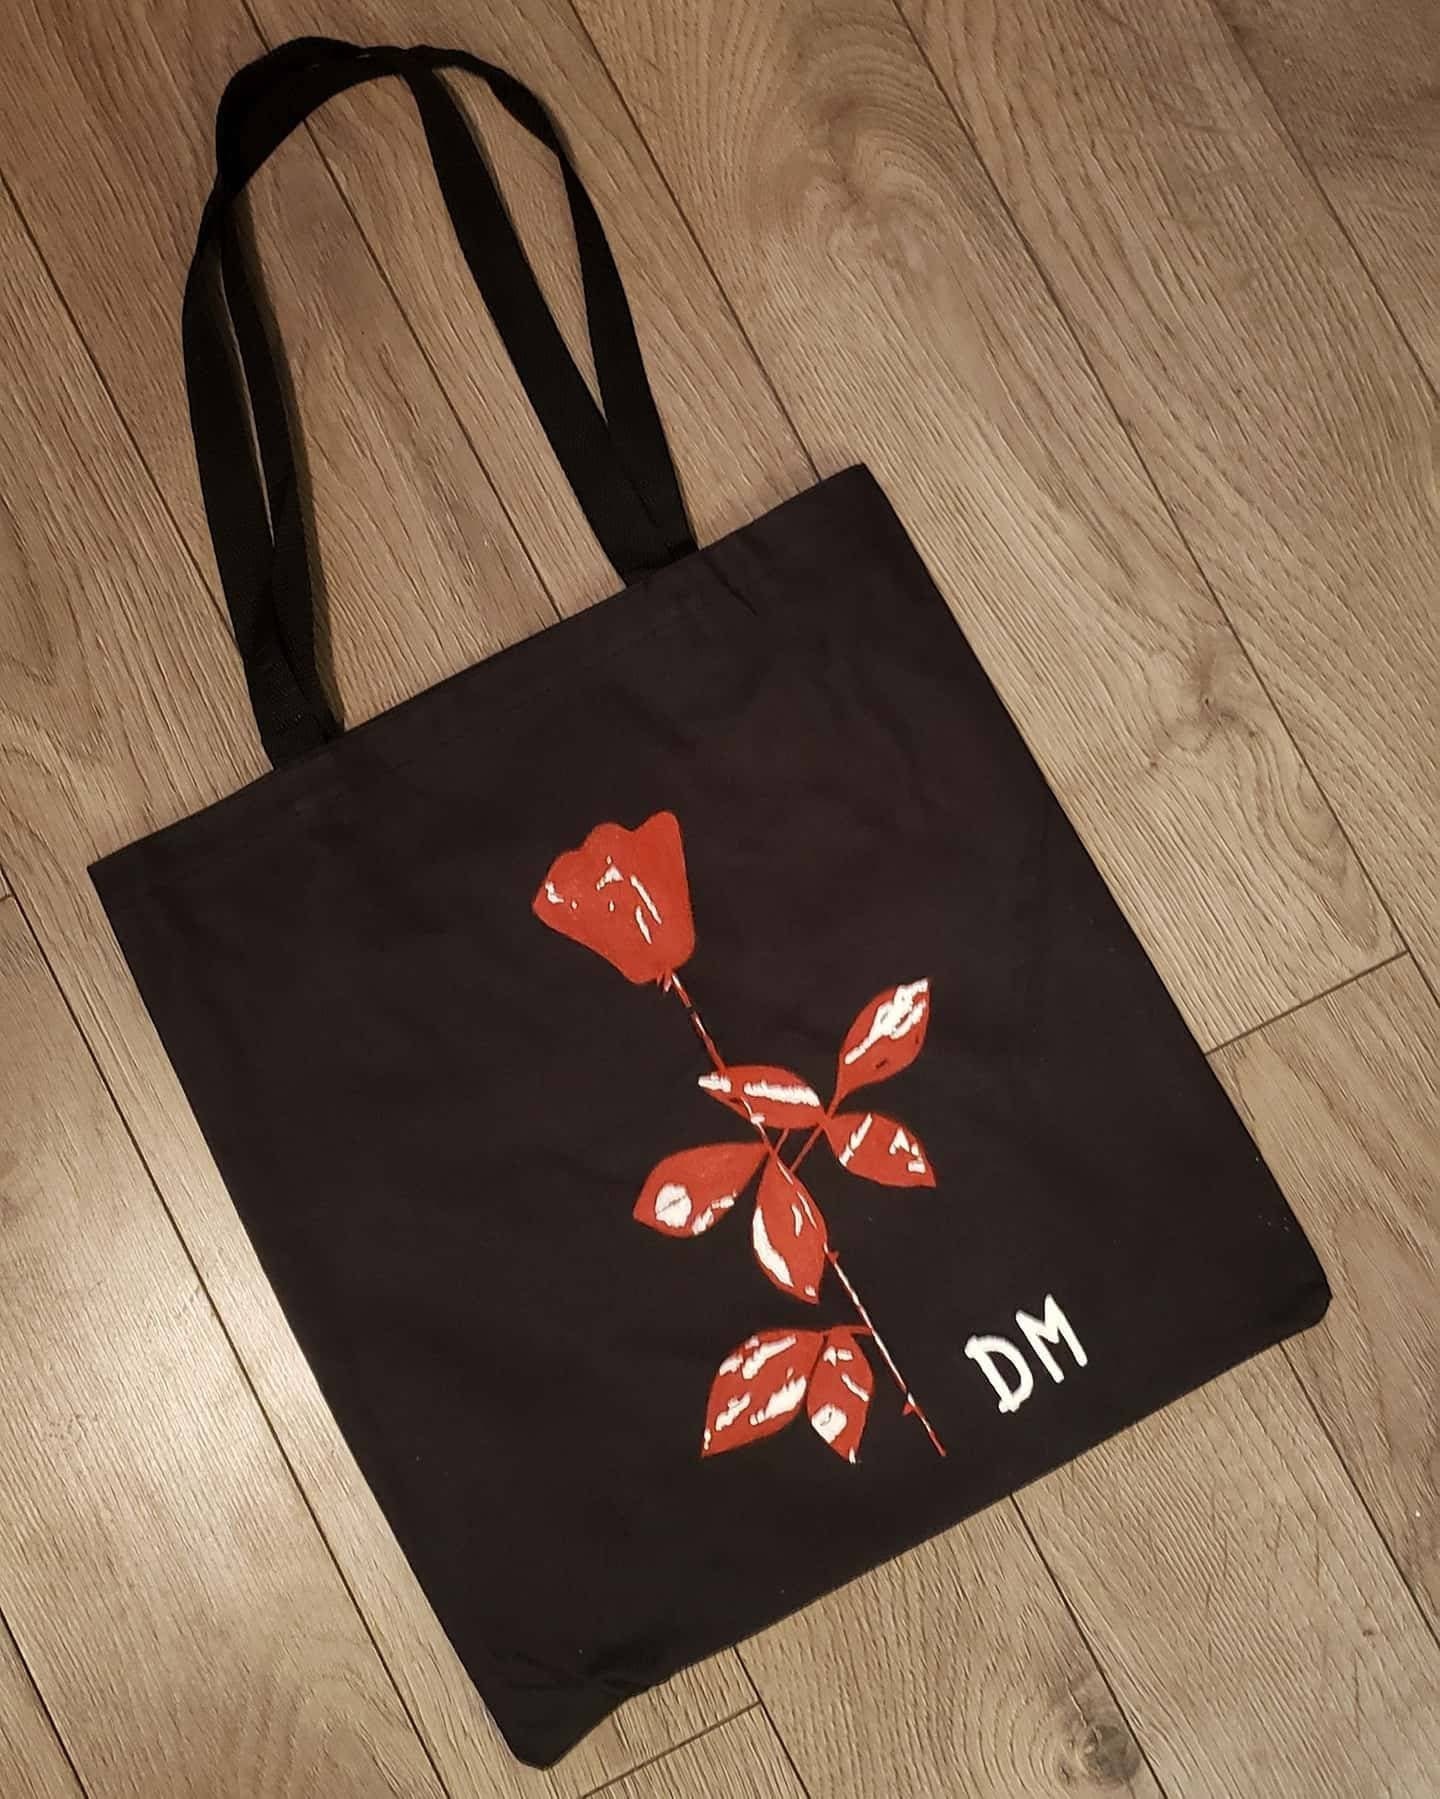 DEPECHE MODE Painted Bag Made to Order -